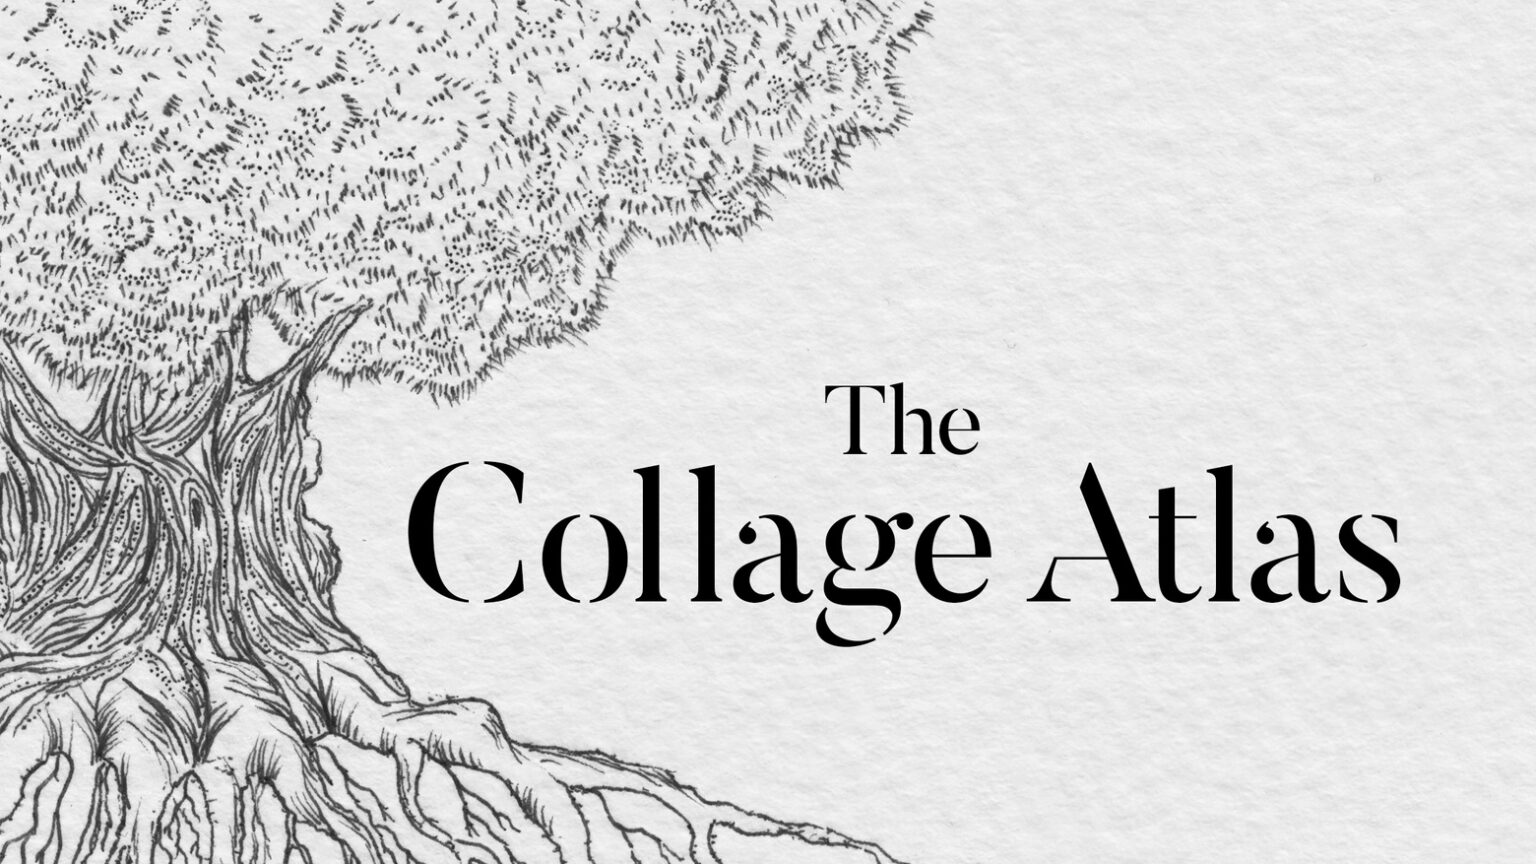 ‘The Collage Atlas’ debuted Friday on Apple Arcade.